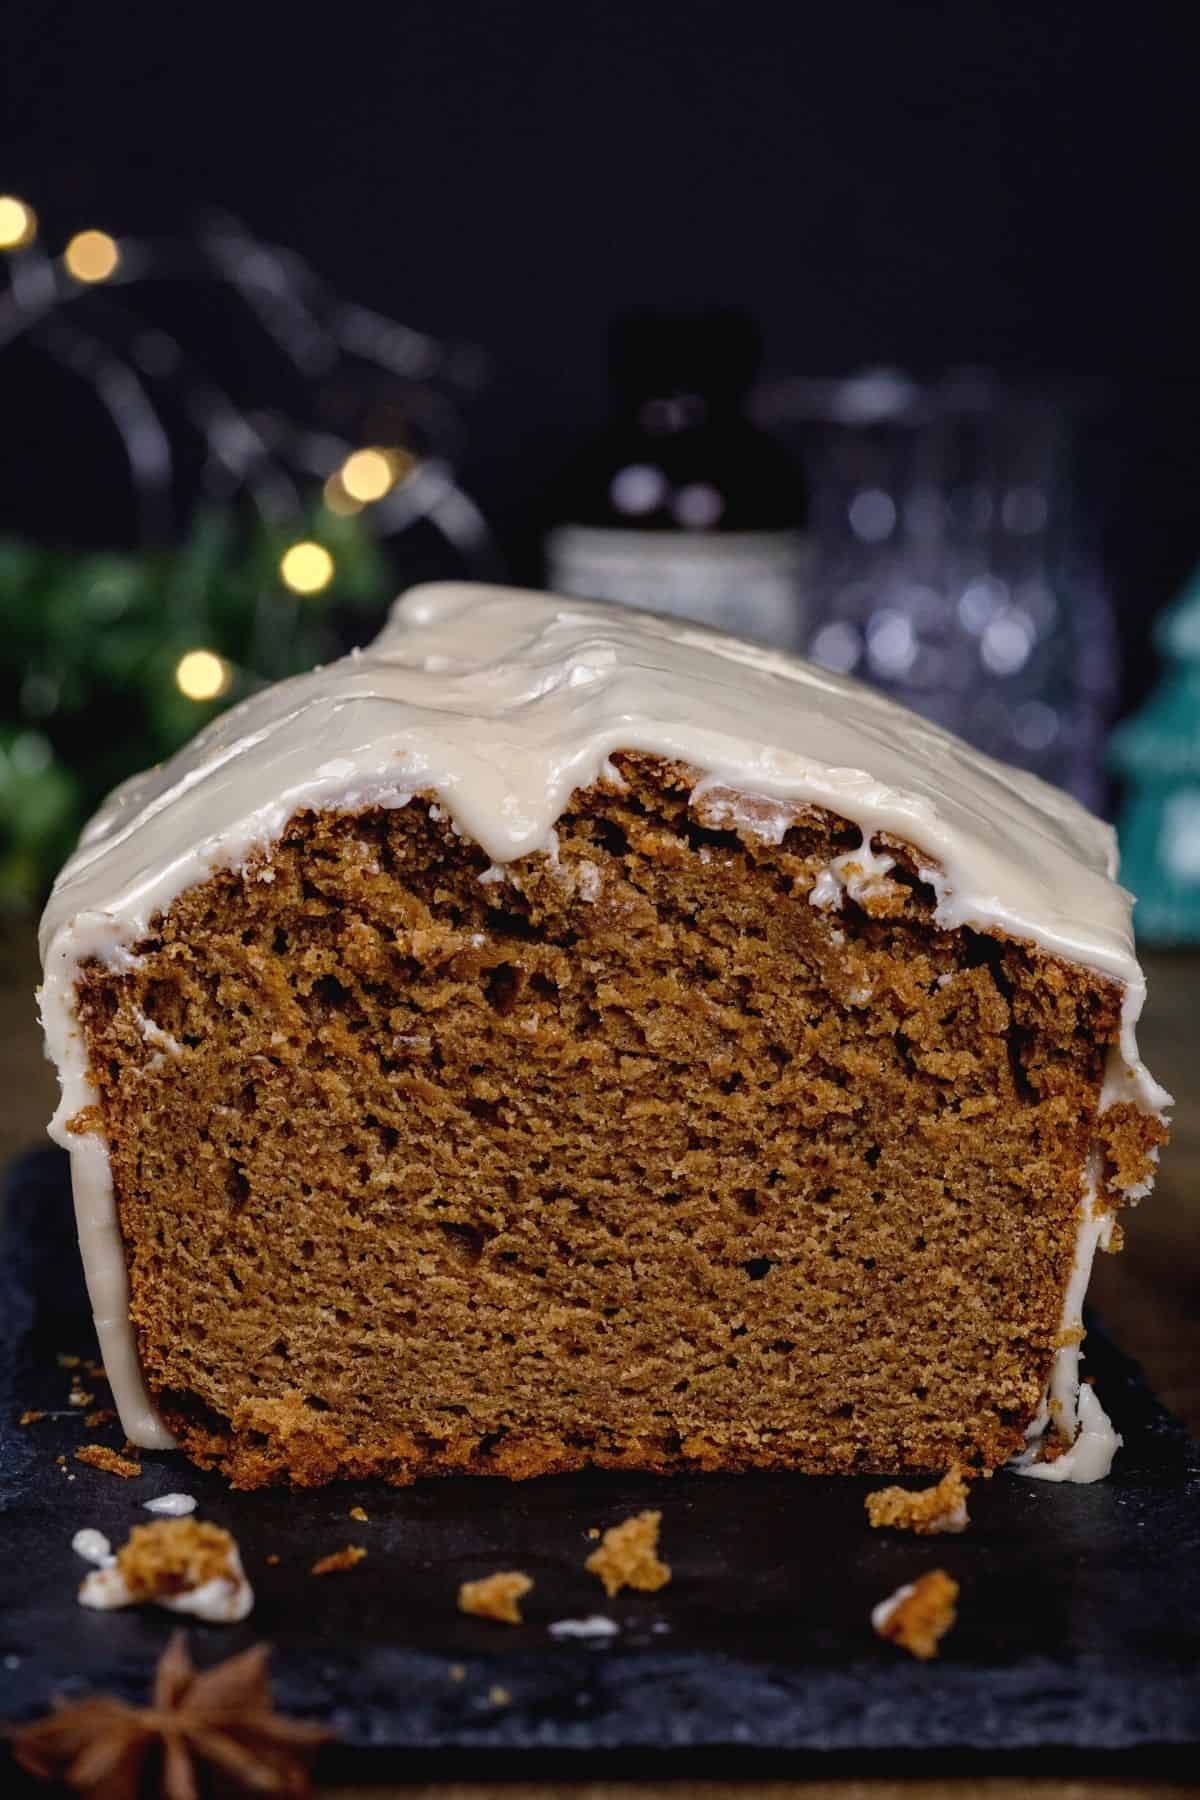 close up of a slice of gingerbread loaf cake so you can see the fully cooked texture. crumbs are in front of the cake. lights are blurred in the background.